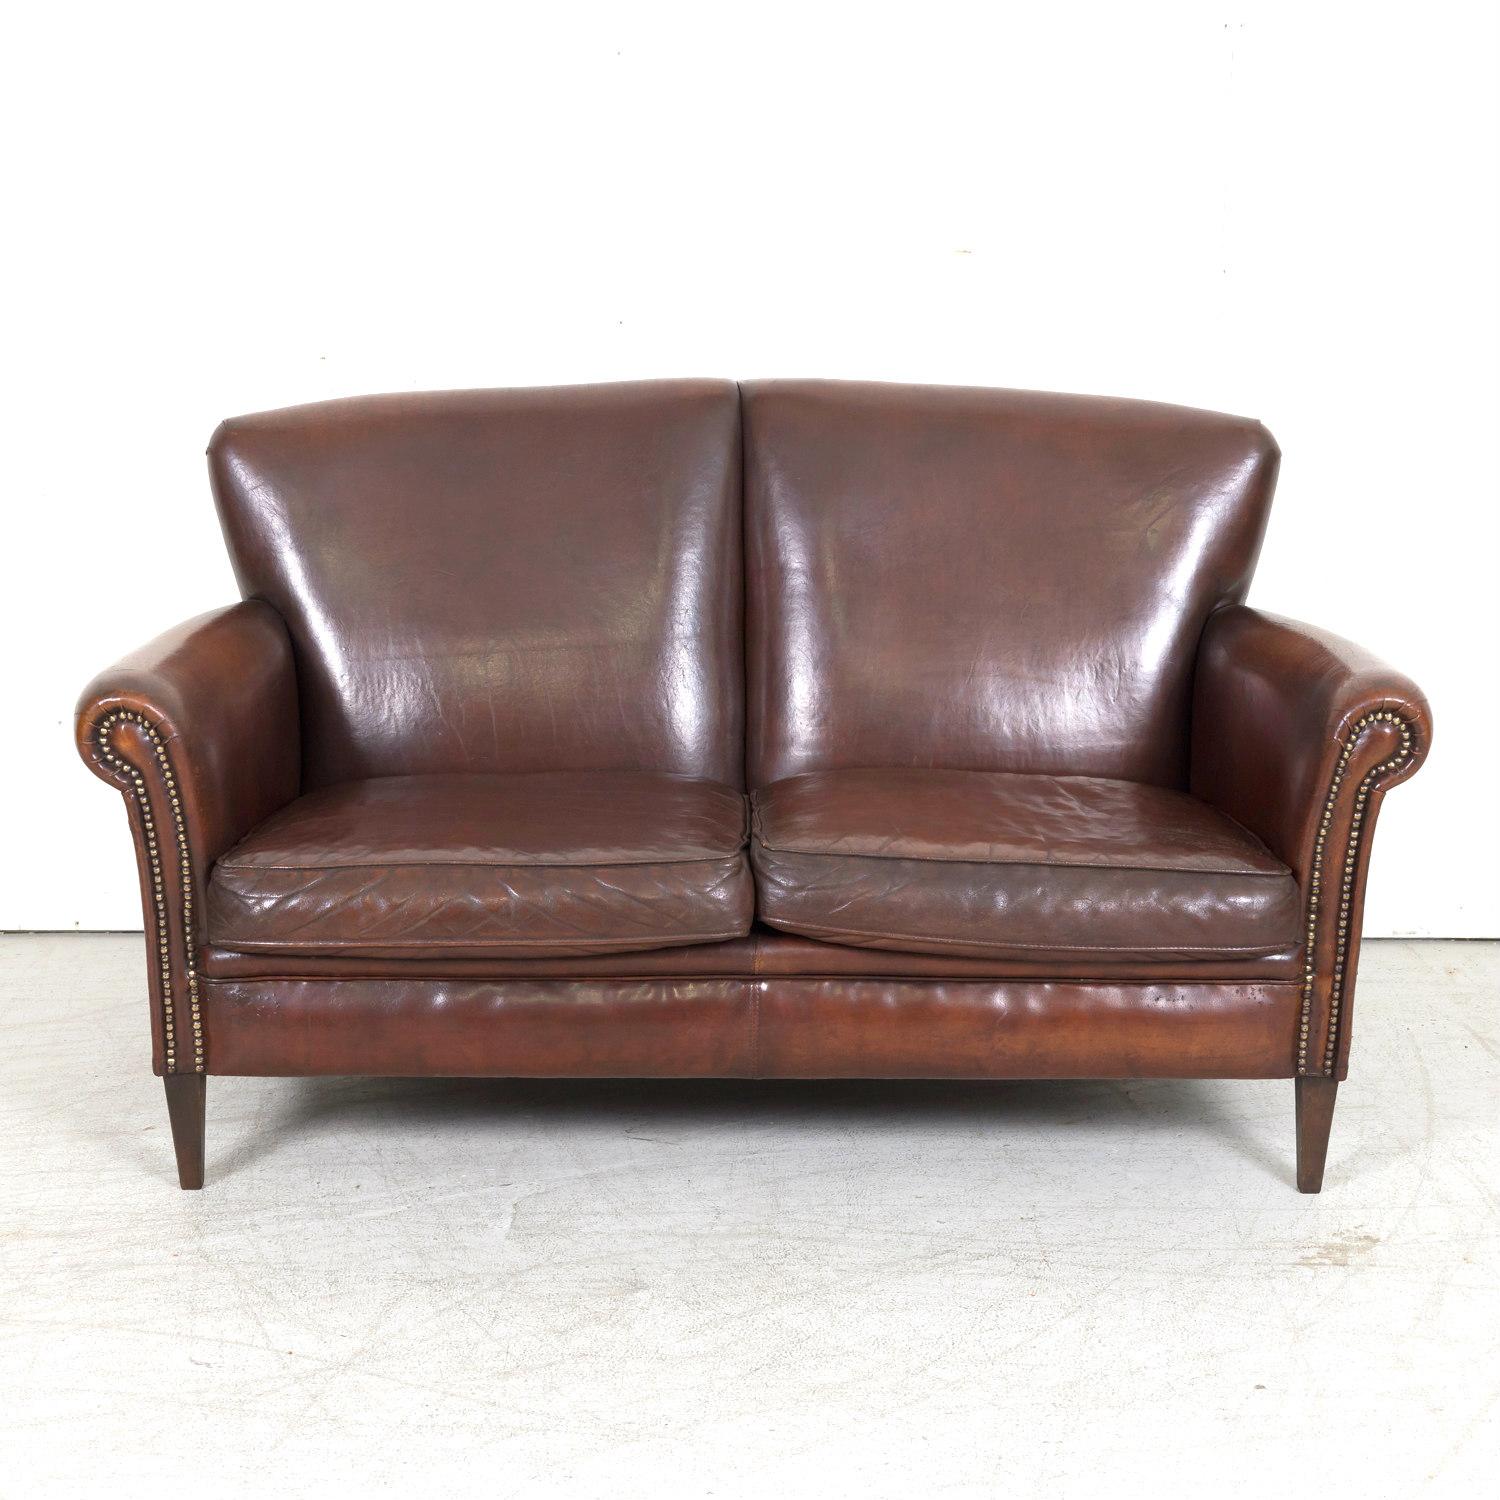 Early 20th Century 20th Century French Art Deco Settee or Sofa in Original Dark Brown Leather For Sale